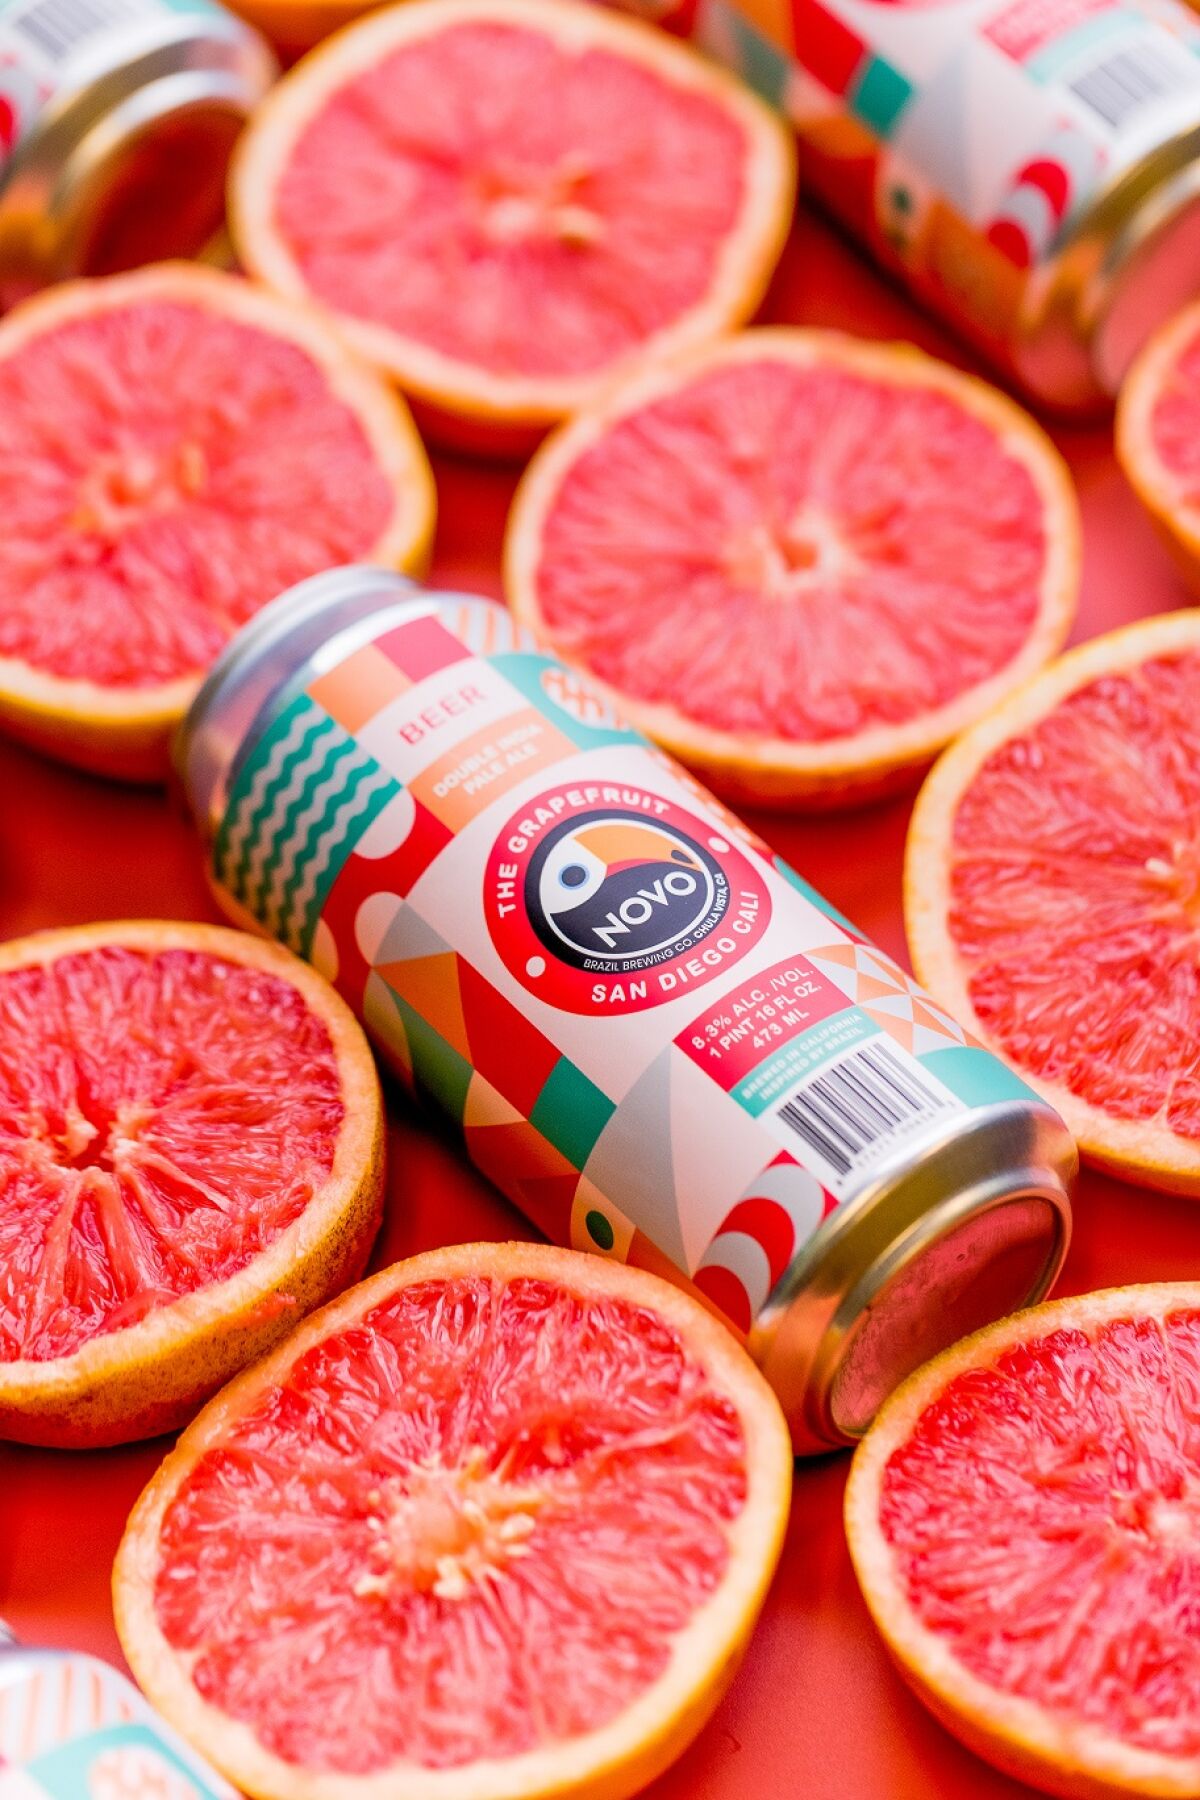 Novo Brazil Brewing Co. Grapefruit Double IPA in a can.